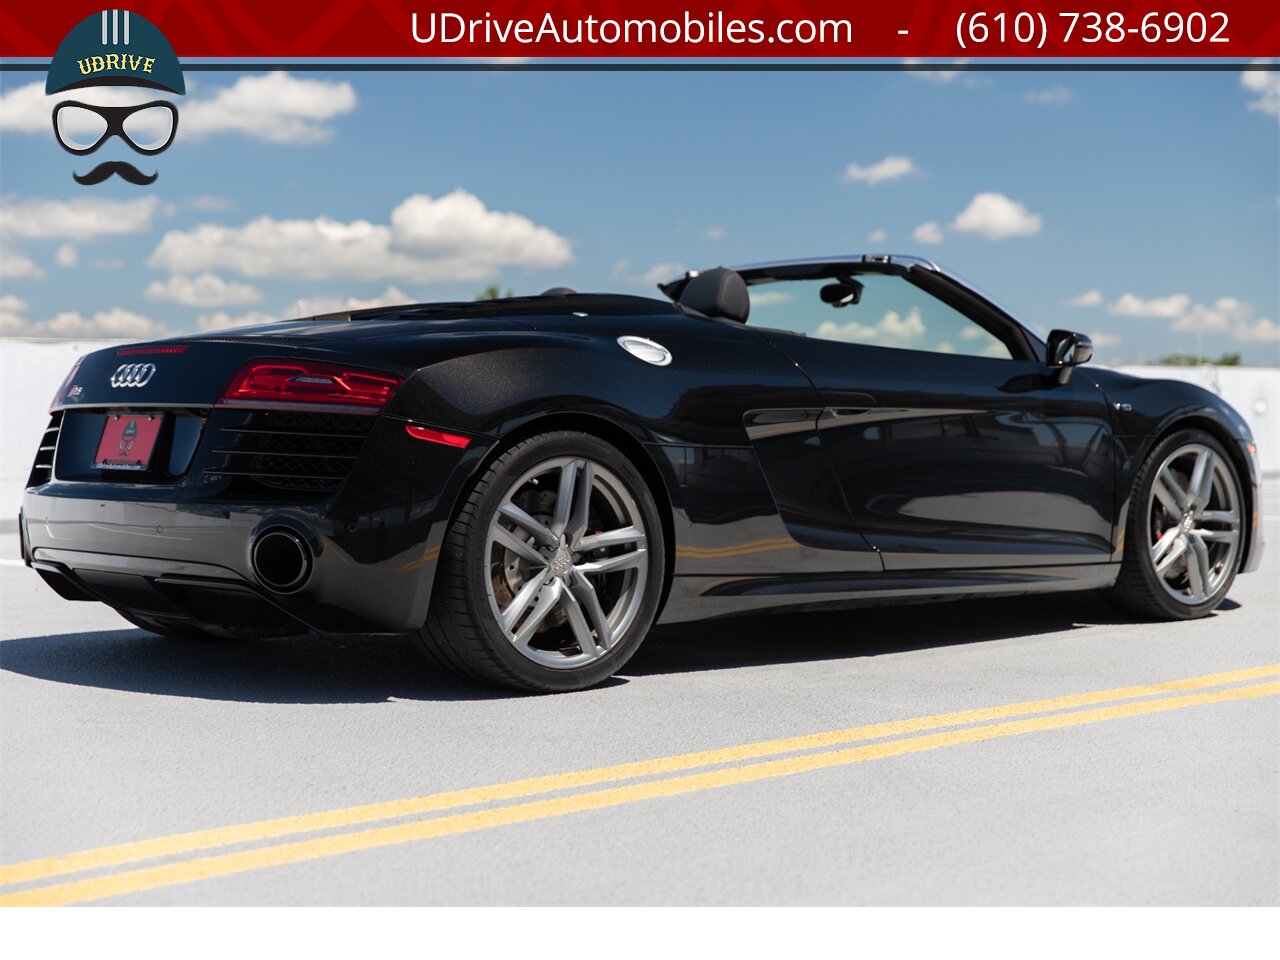 2014 Audi R8 5.2 V10 Quattro Spyder 6 Speed Manual 2k Miles  Extremely RARE 1 of 1 Color Combo - Photo 18 - West Chester, PA 19382